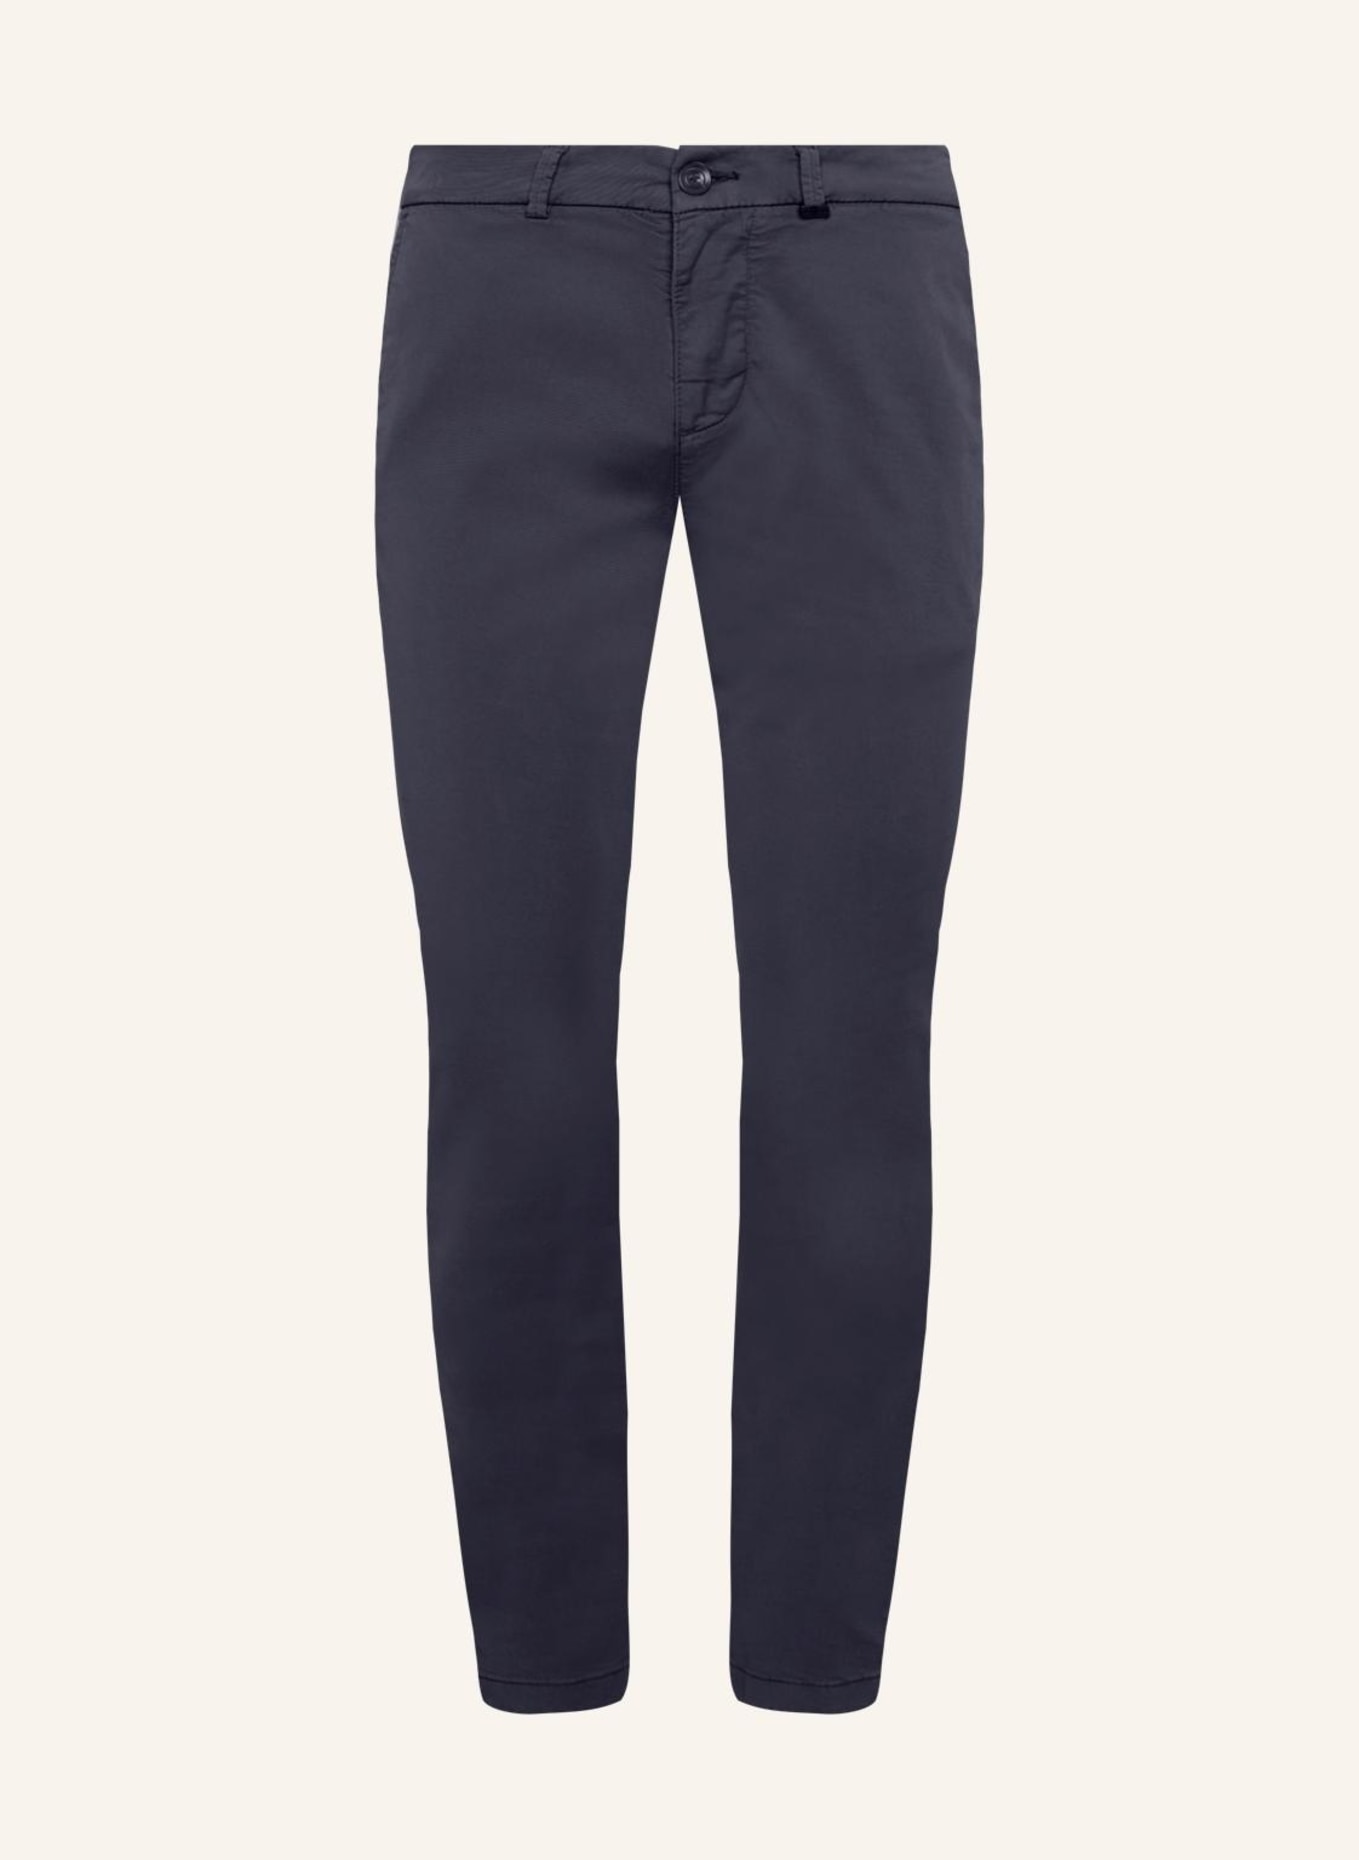 7 for all mankind SLIMMY CHINO TAPERED Pants, Farbe: BLAU (Bild 1)